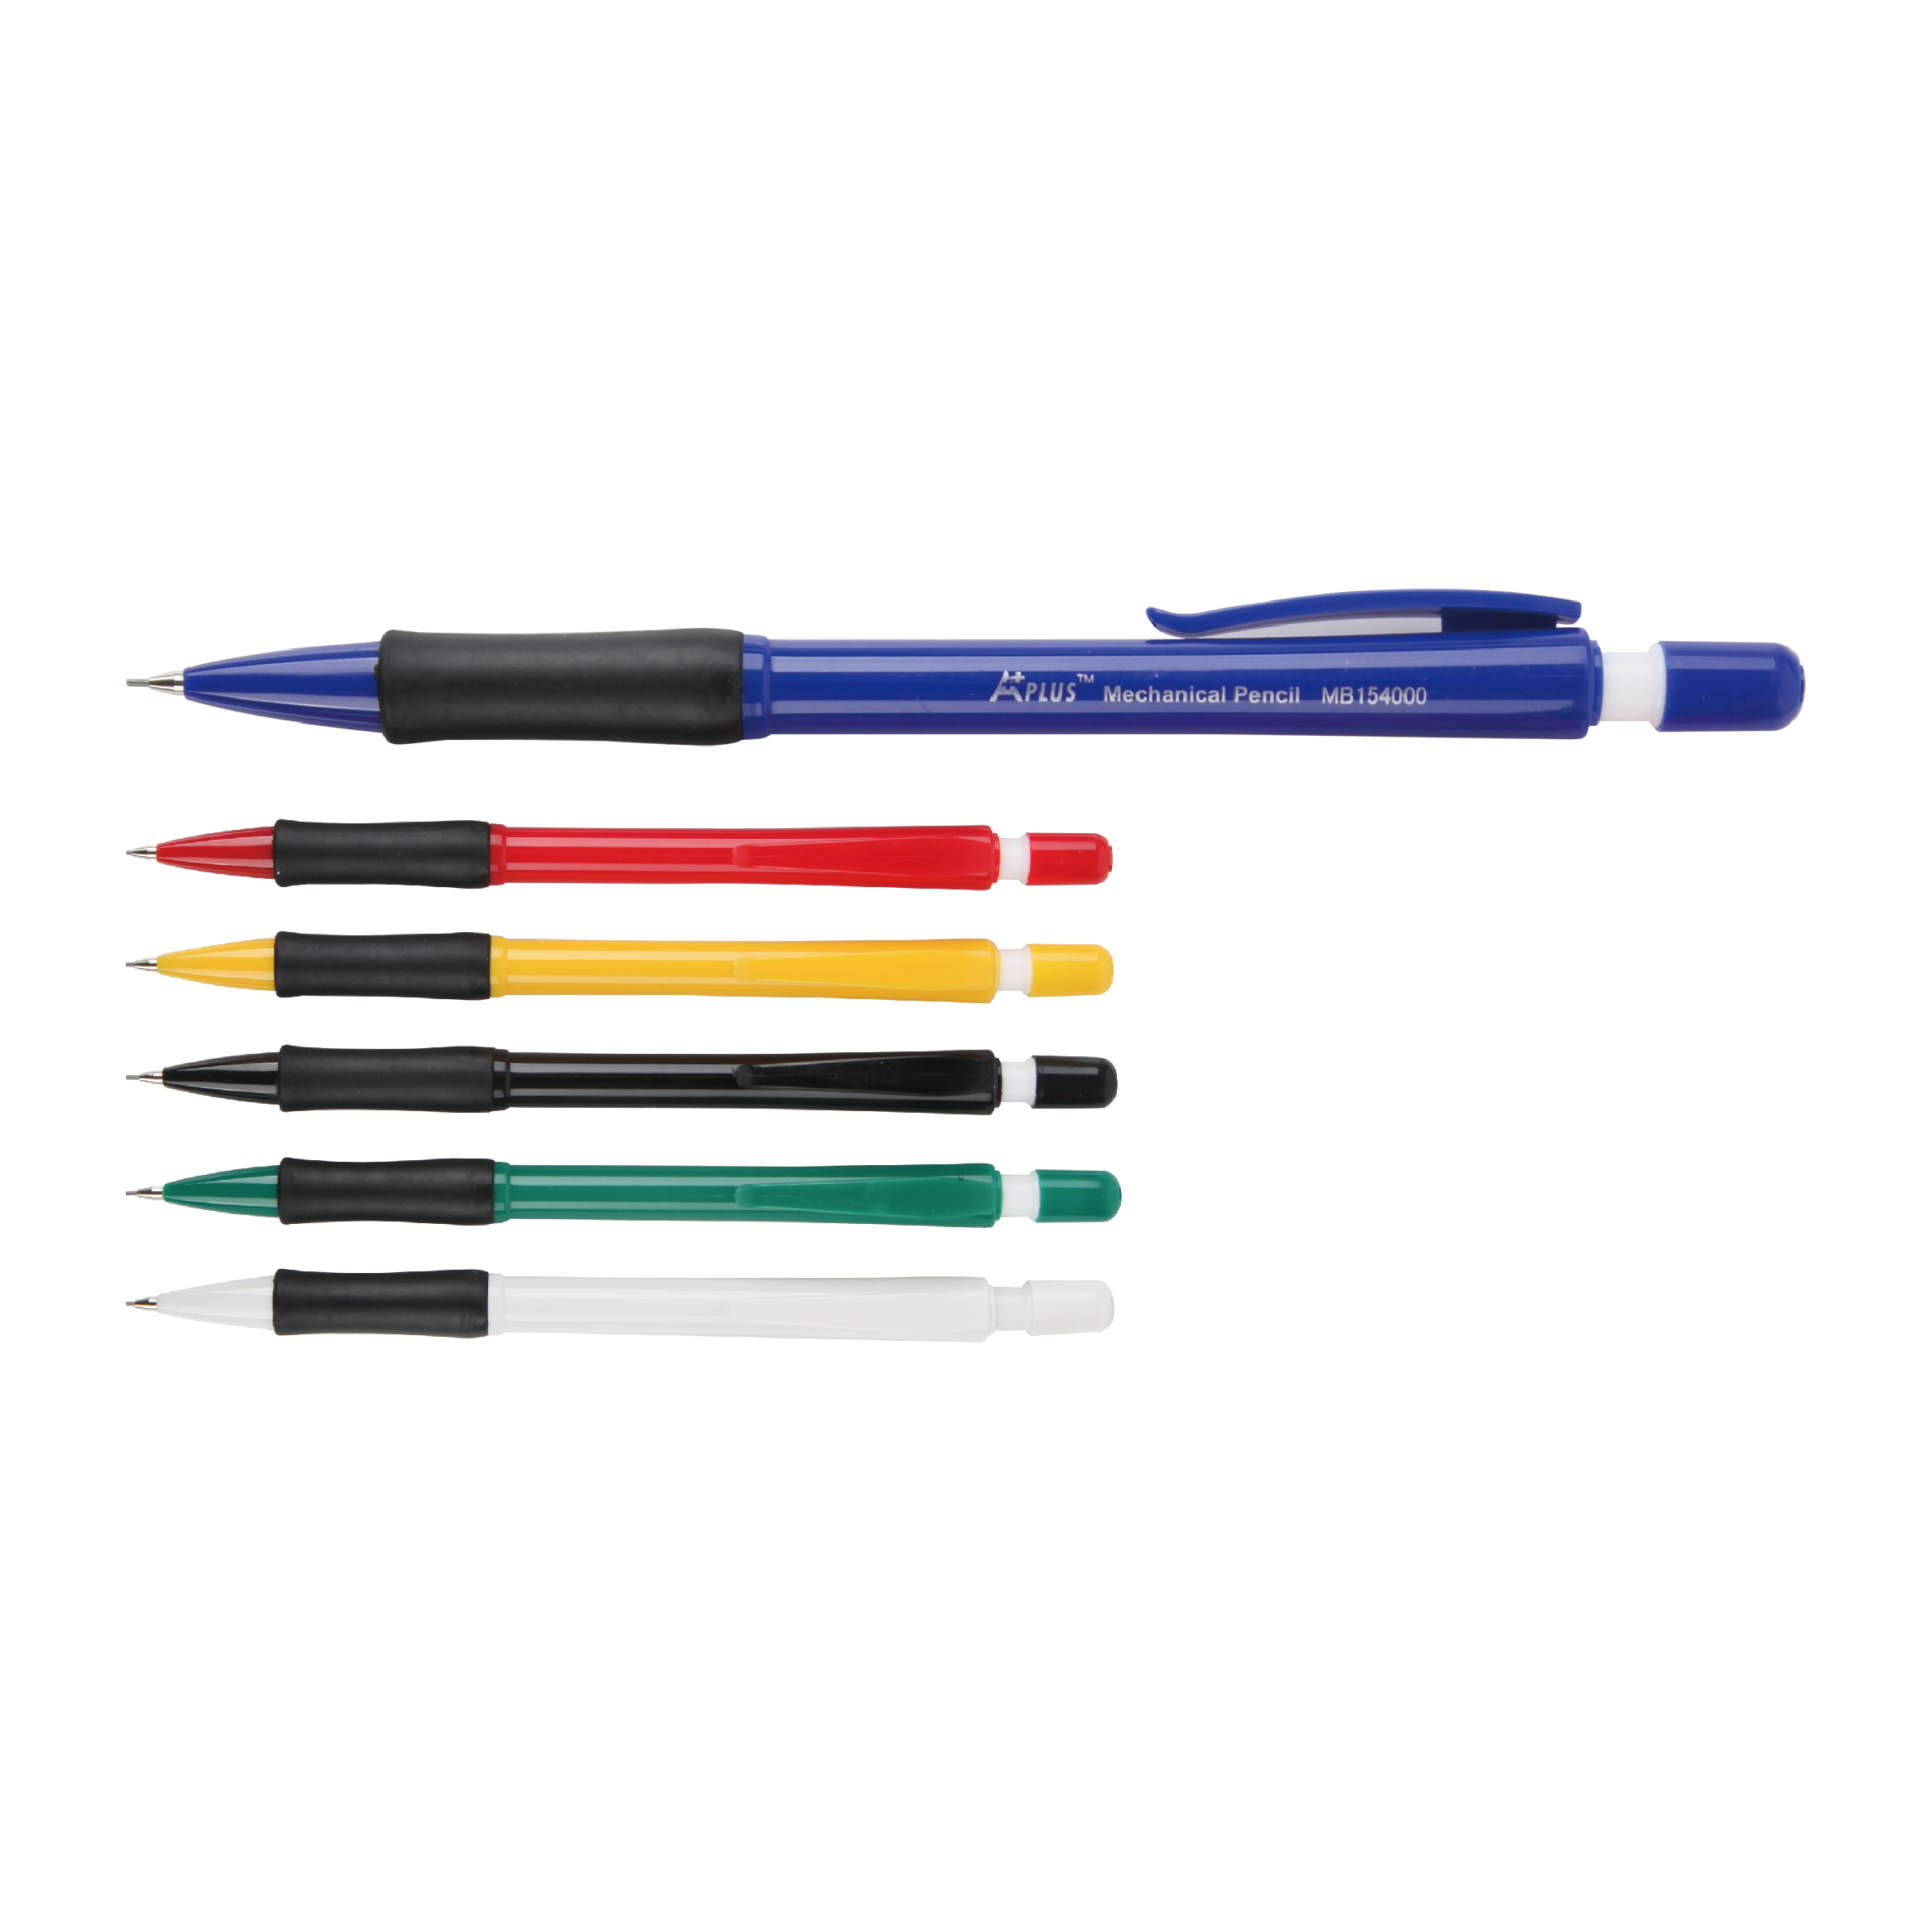 HB/2B Lead Wholesale Eraser End Automatic Pencil with Soft Grip